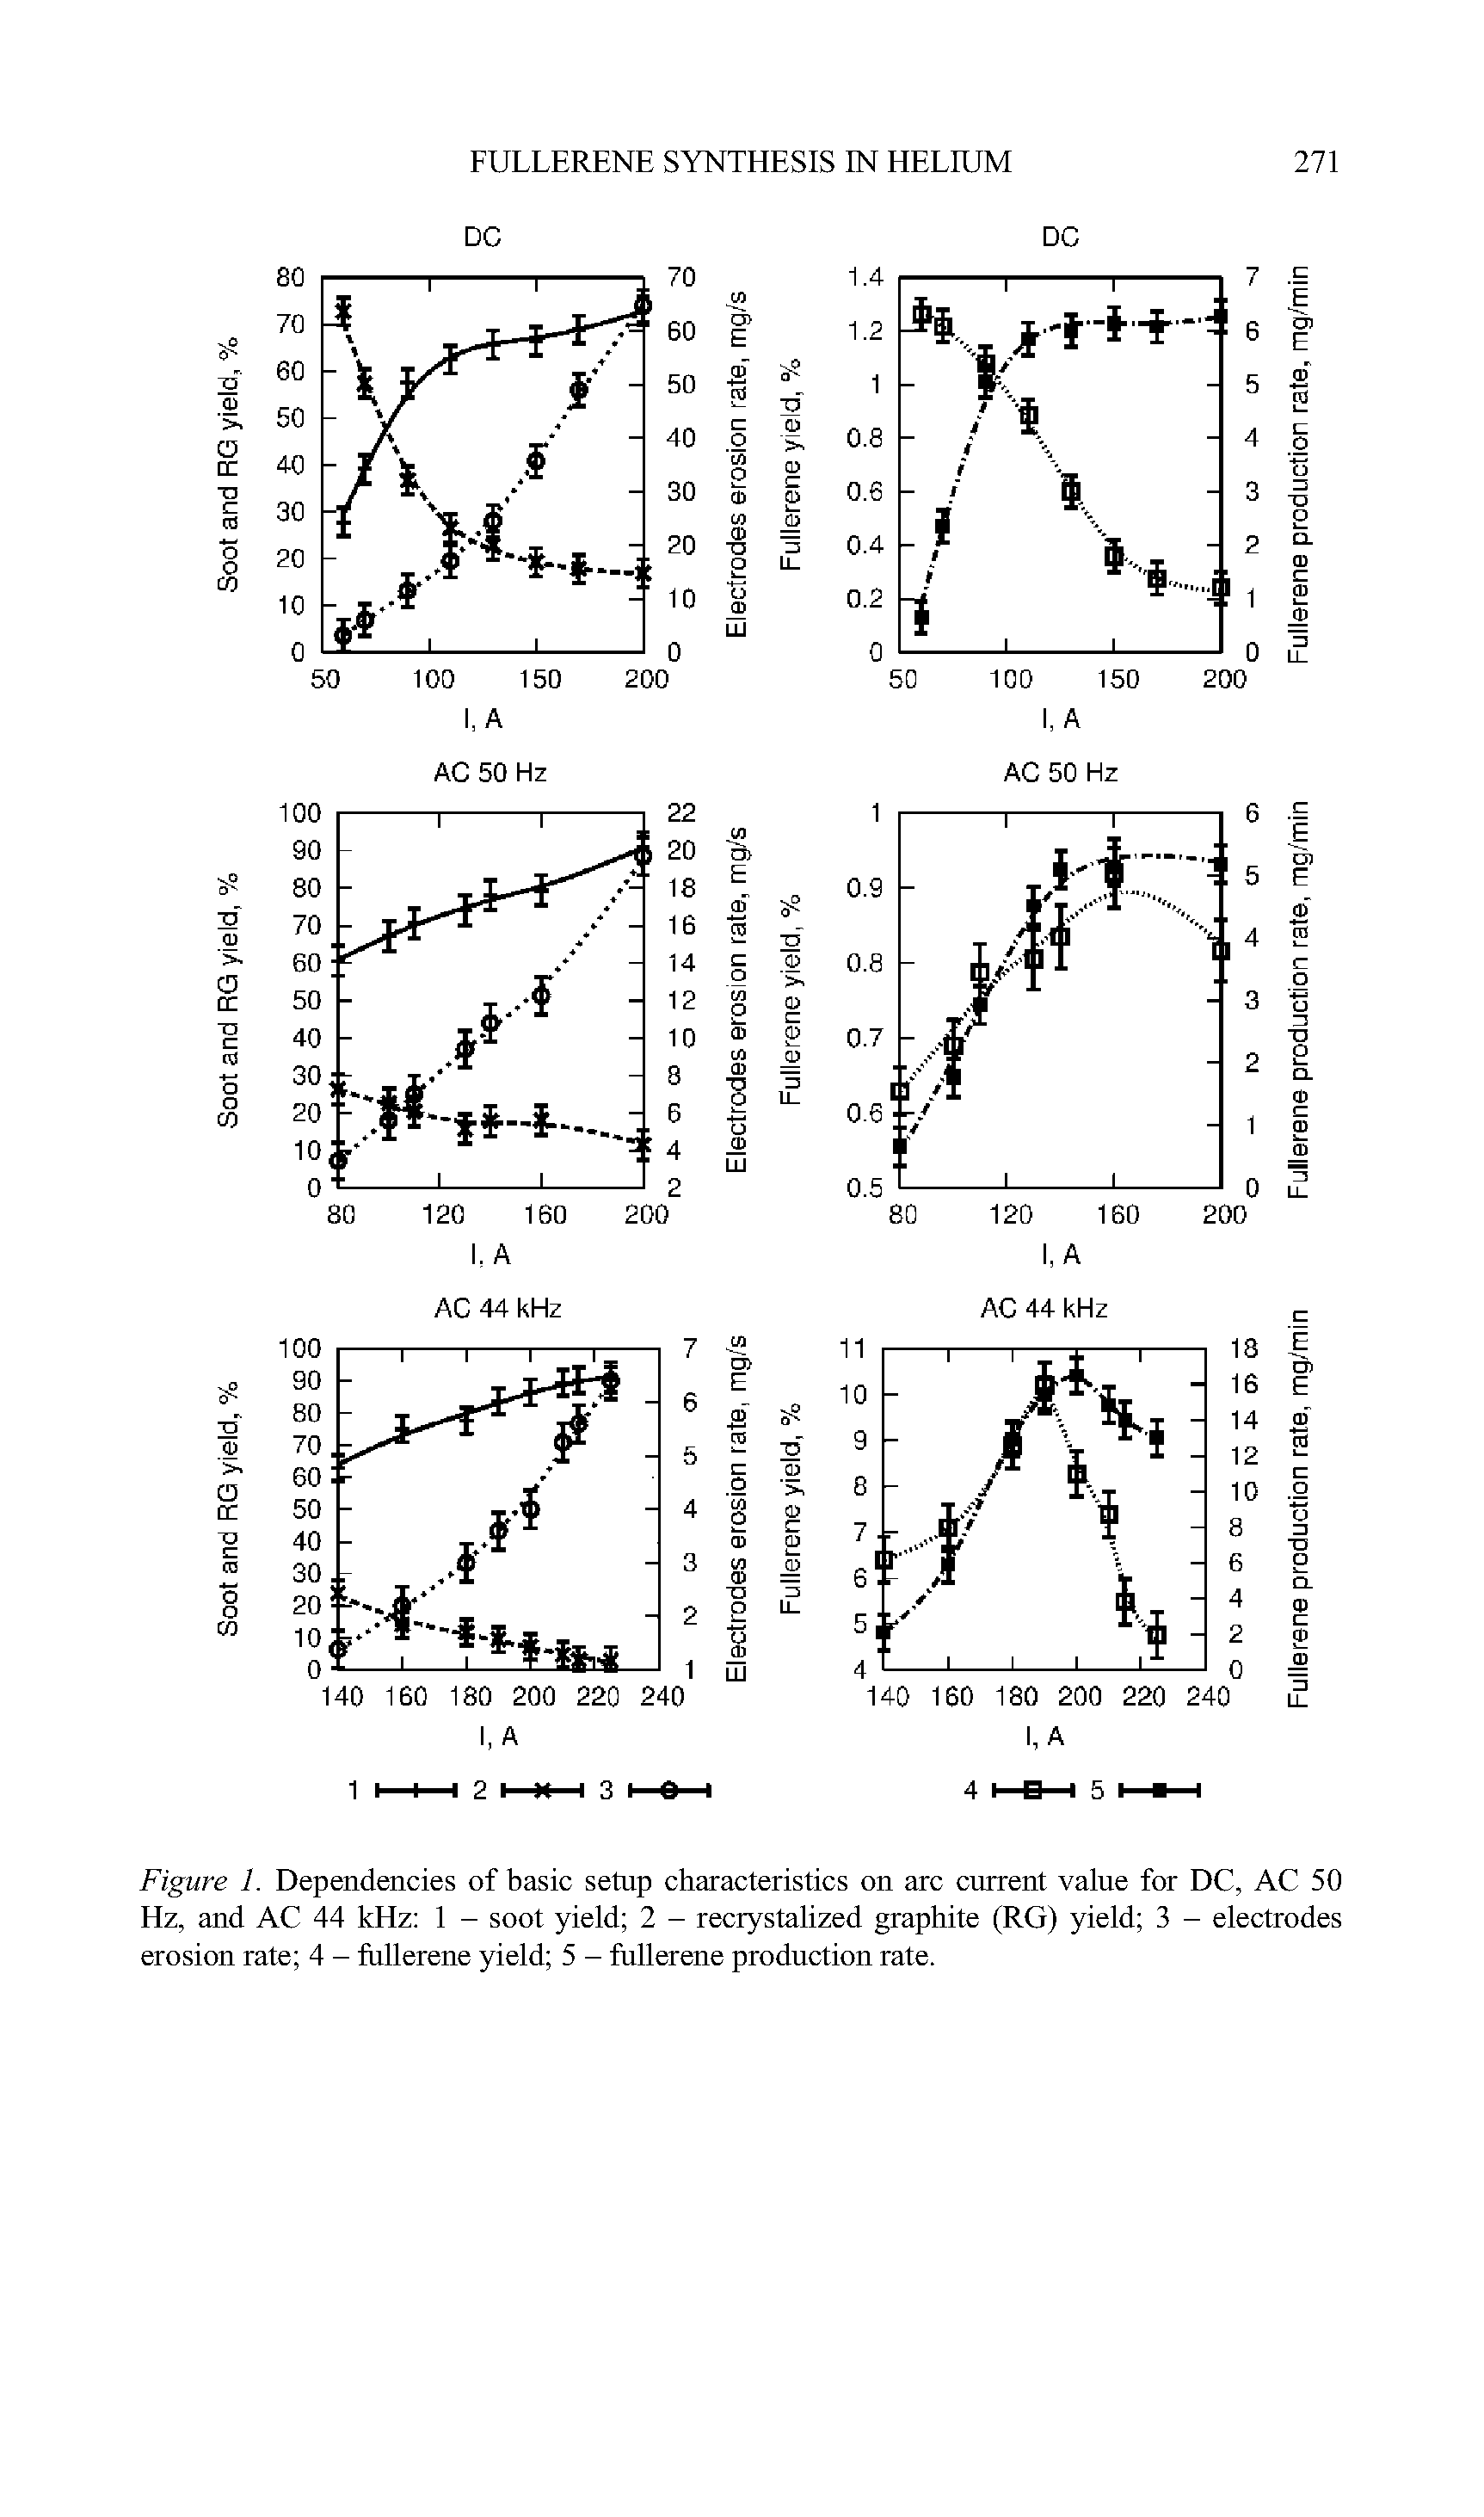 Figure 1. Dependencies of basic setup characteristics on arc current value for DC, AC 50 Hz, and AC 44 kHz 1 - soot yield 2 - recrystalized graphite (RG) yield 3 - electrodes erosion rate 4 - fixllerene yield 5 - fullerene production rate.